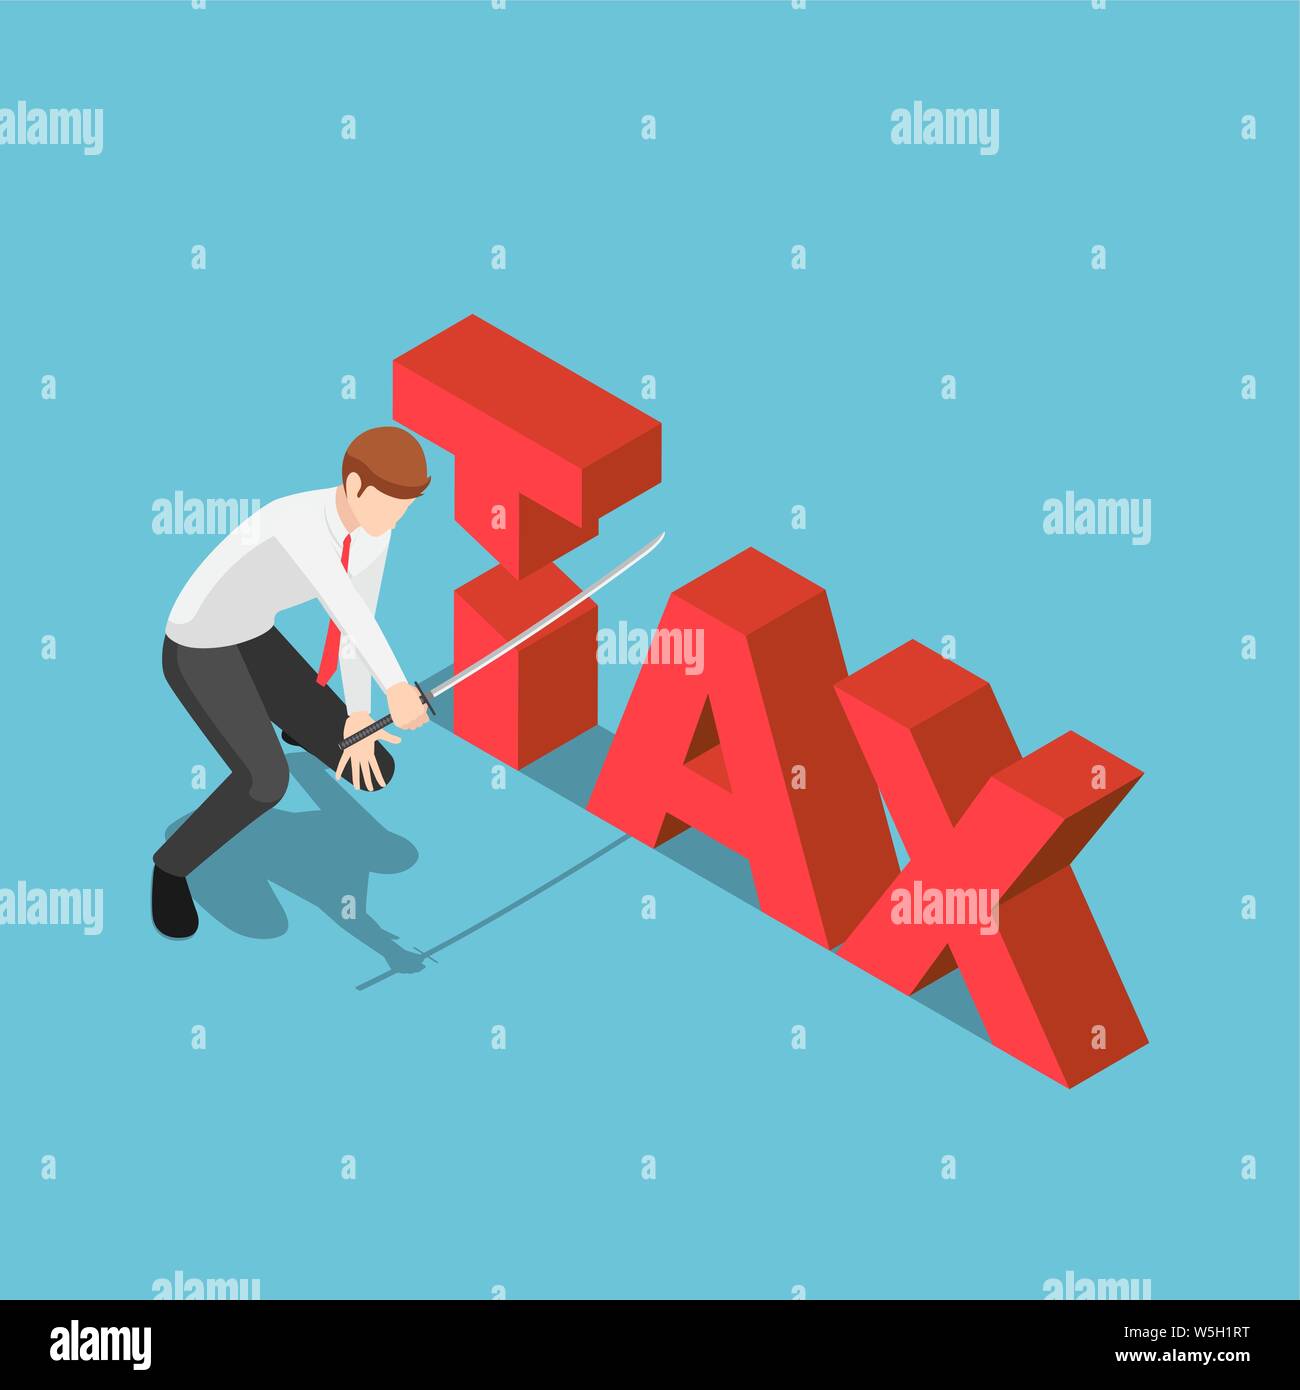 Flat 3d isometric businessman cutting tax word by japanese katana sword. Reducing taxes concept. Stock Vector